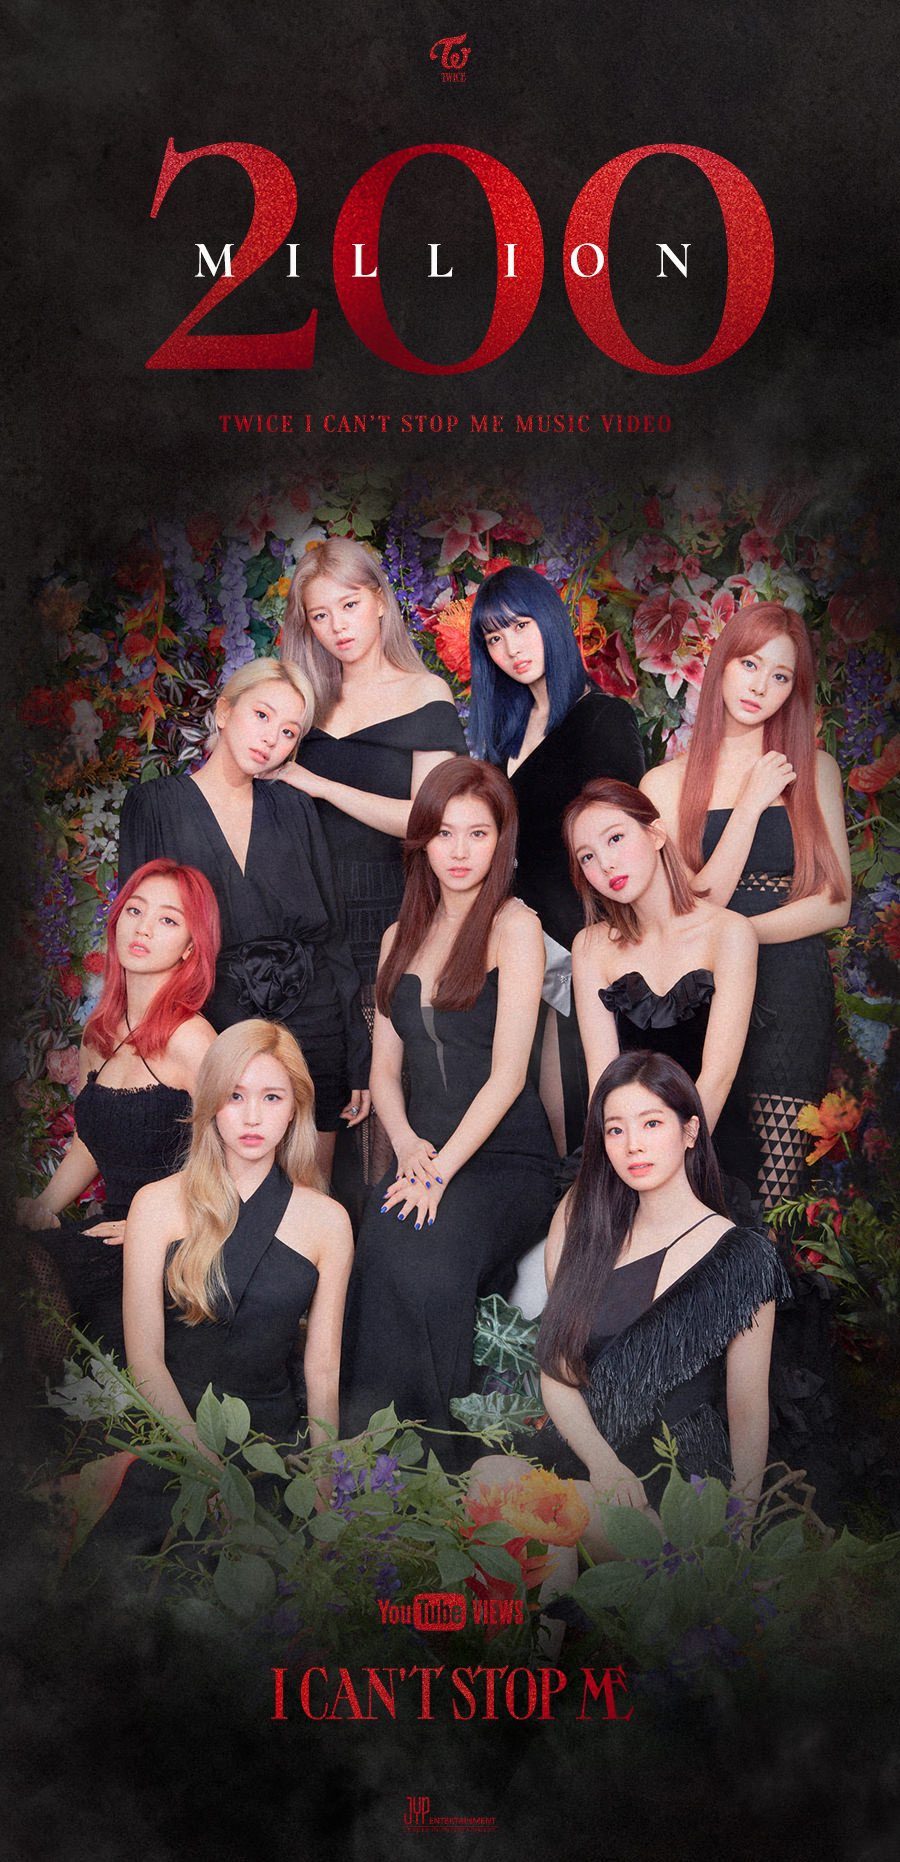 TWICE I CAN'T STOP ME / EYES WIDE OPEN album cover by LEAlbum on DeviantArt